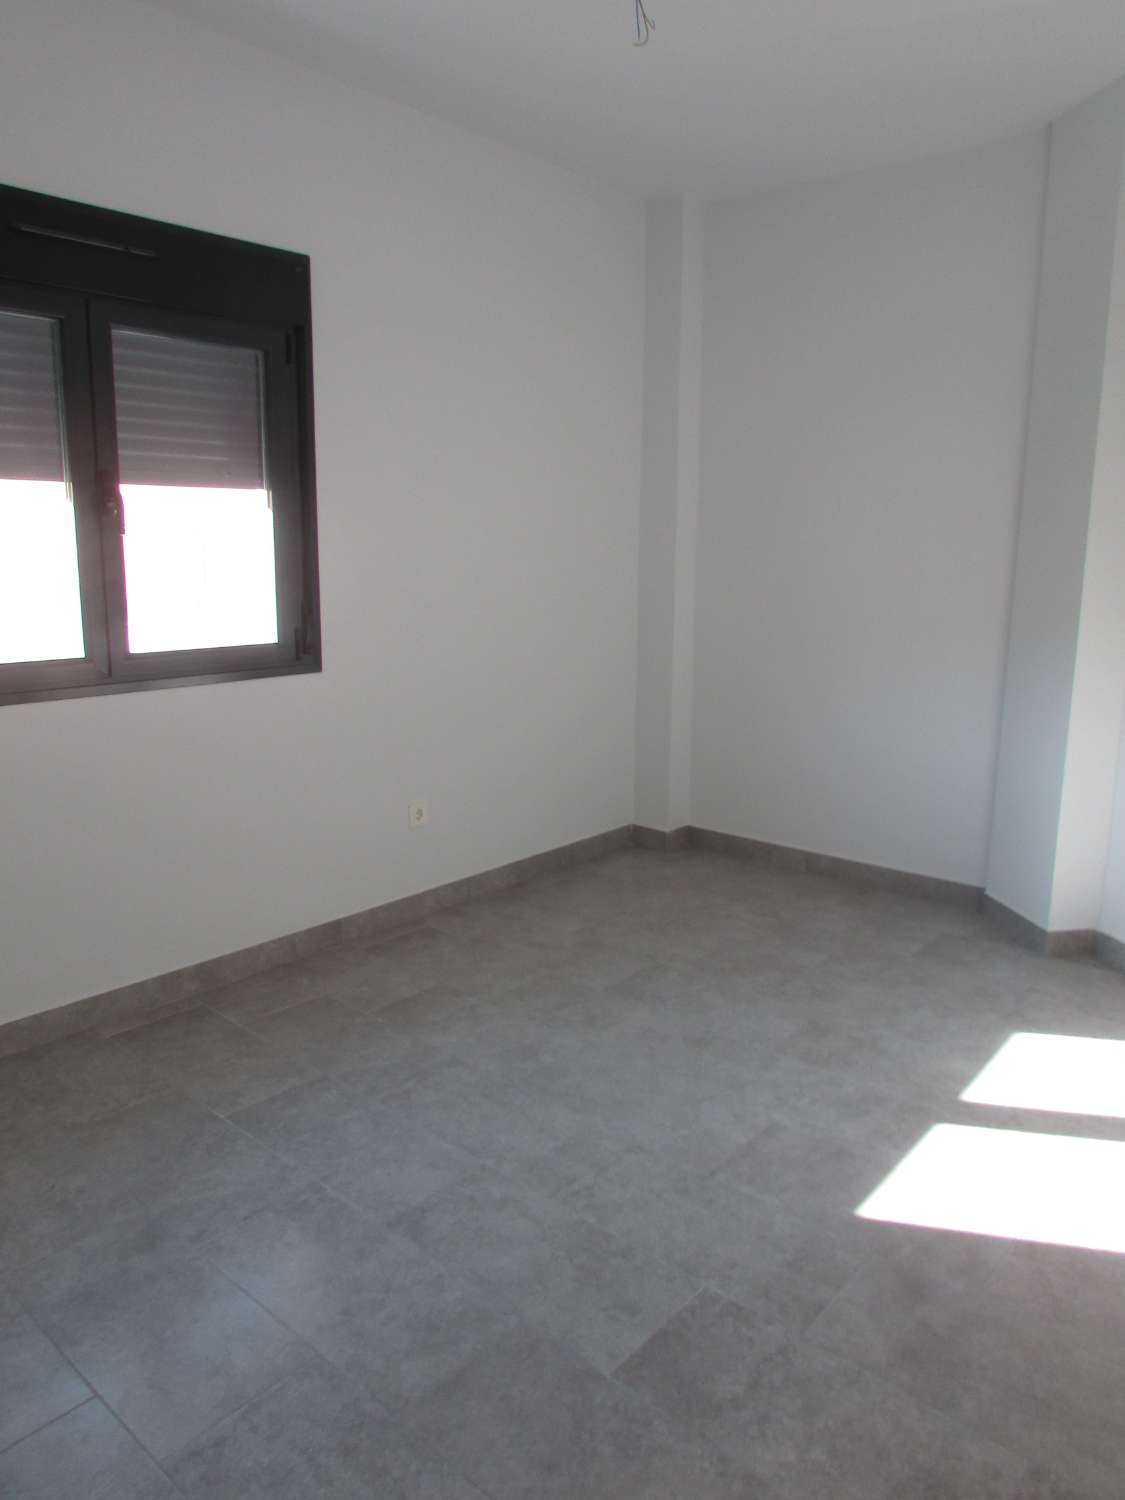 Brand new apartment a few meters from the beach